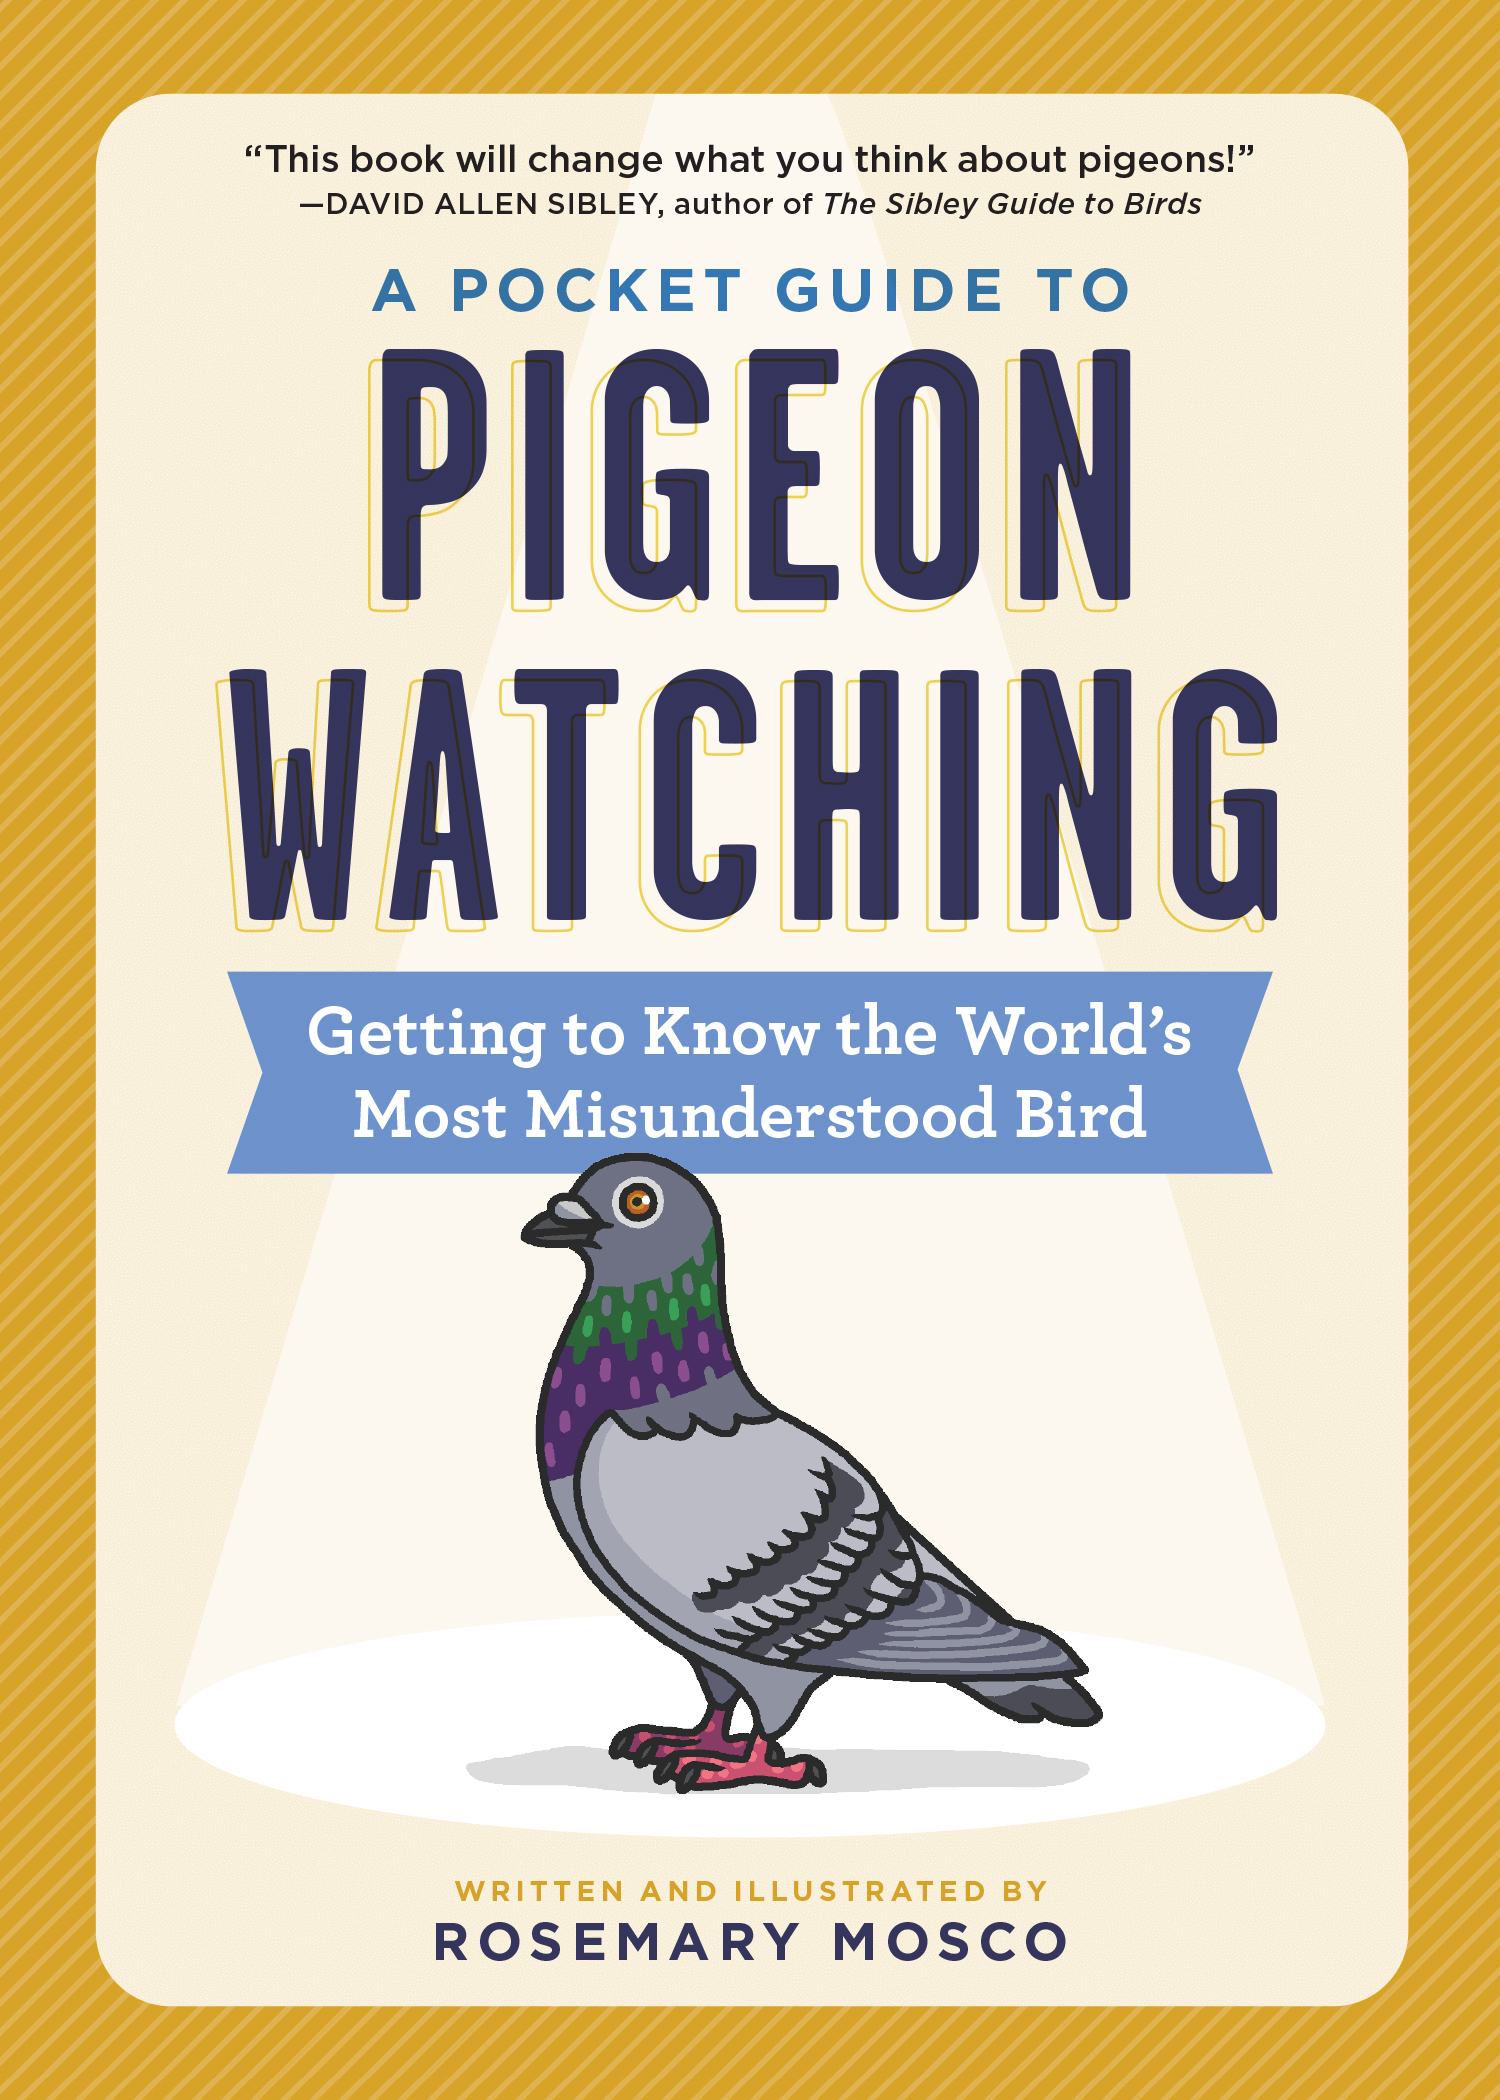 Rosemary Mosco: A Pocket Guide to Pigeon Watching (2021, Workman Publishing Company)